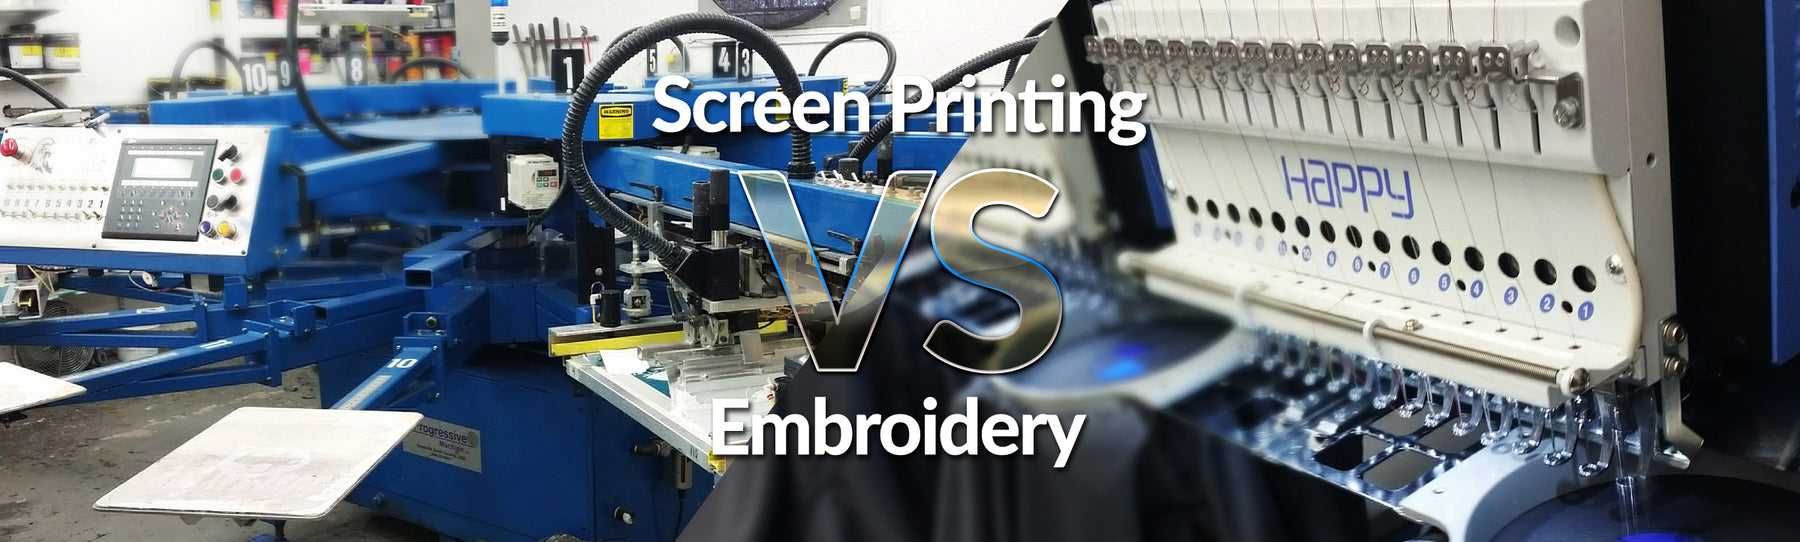 Screen Printing vs Embroidery